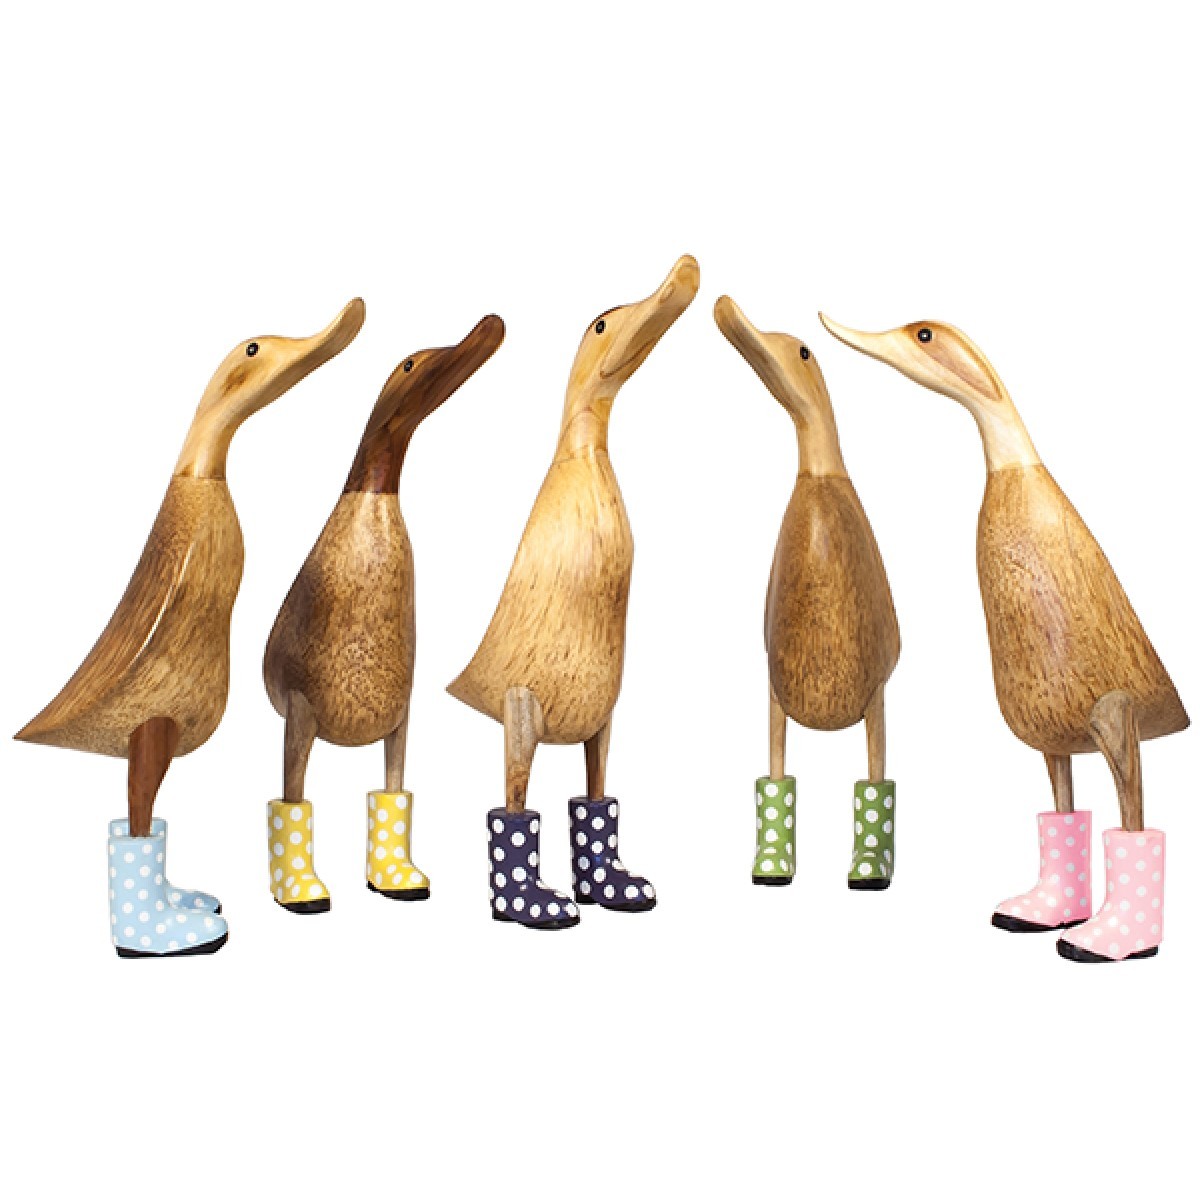 DCUK Spotty Welly Ducklets Set Of 5